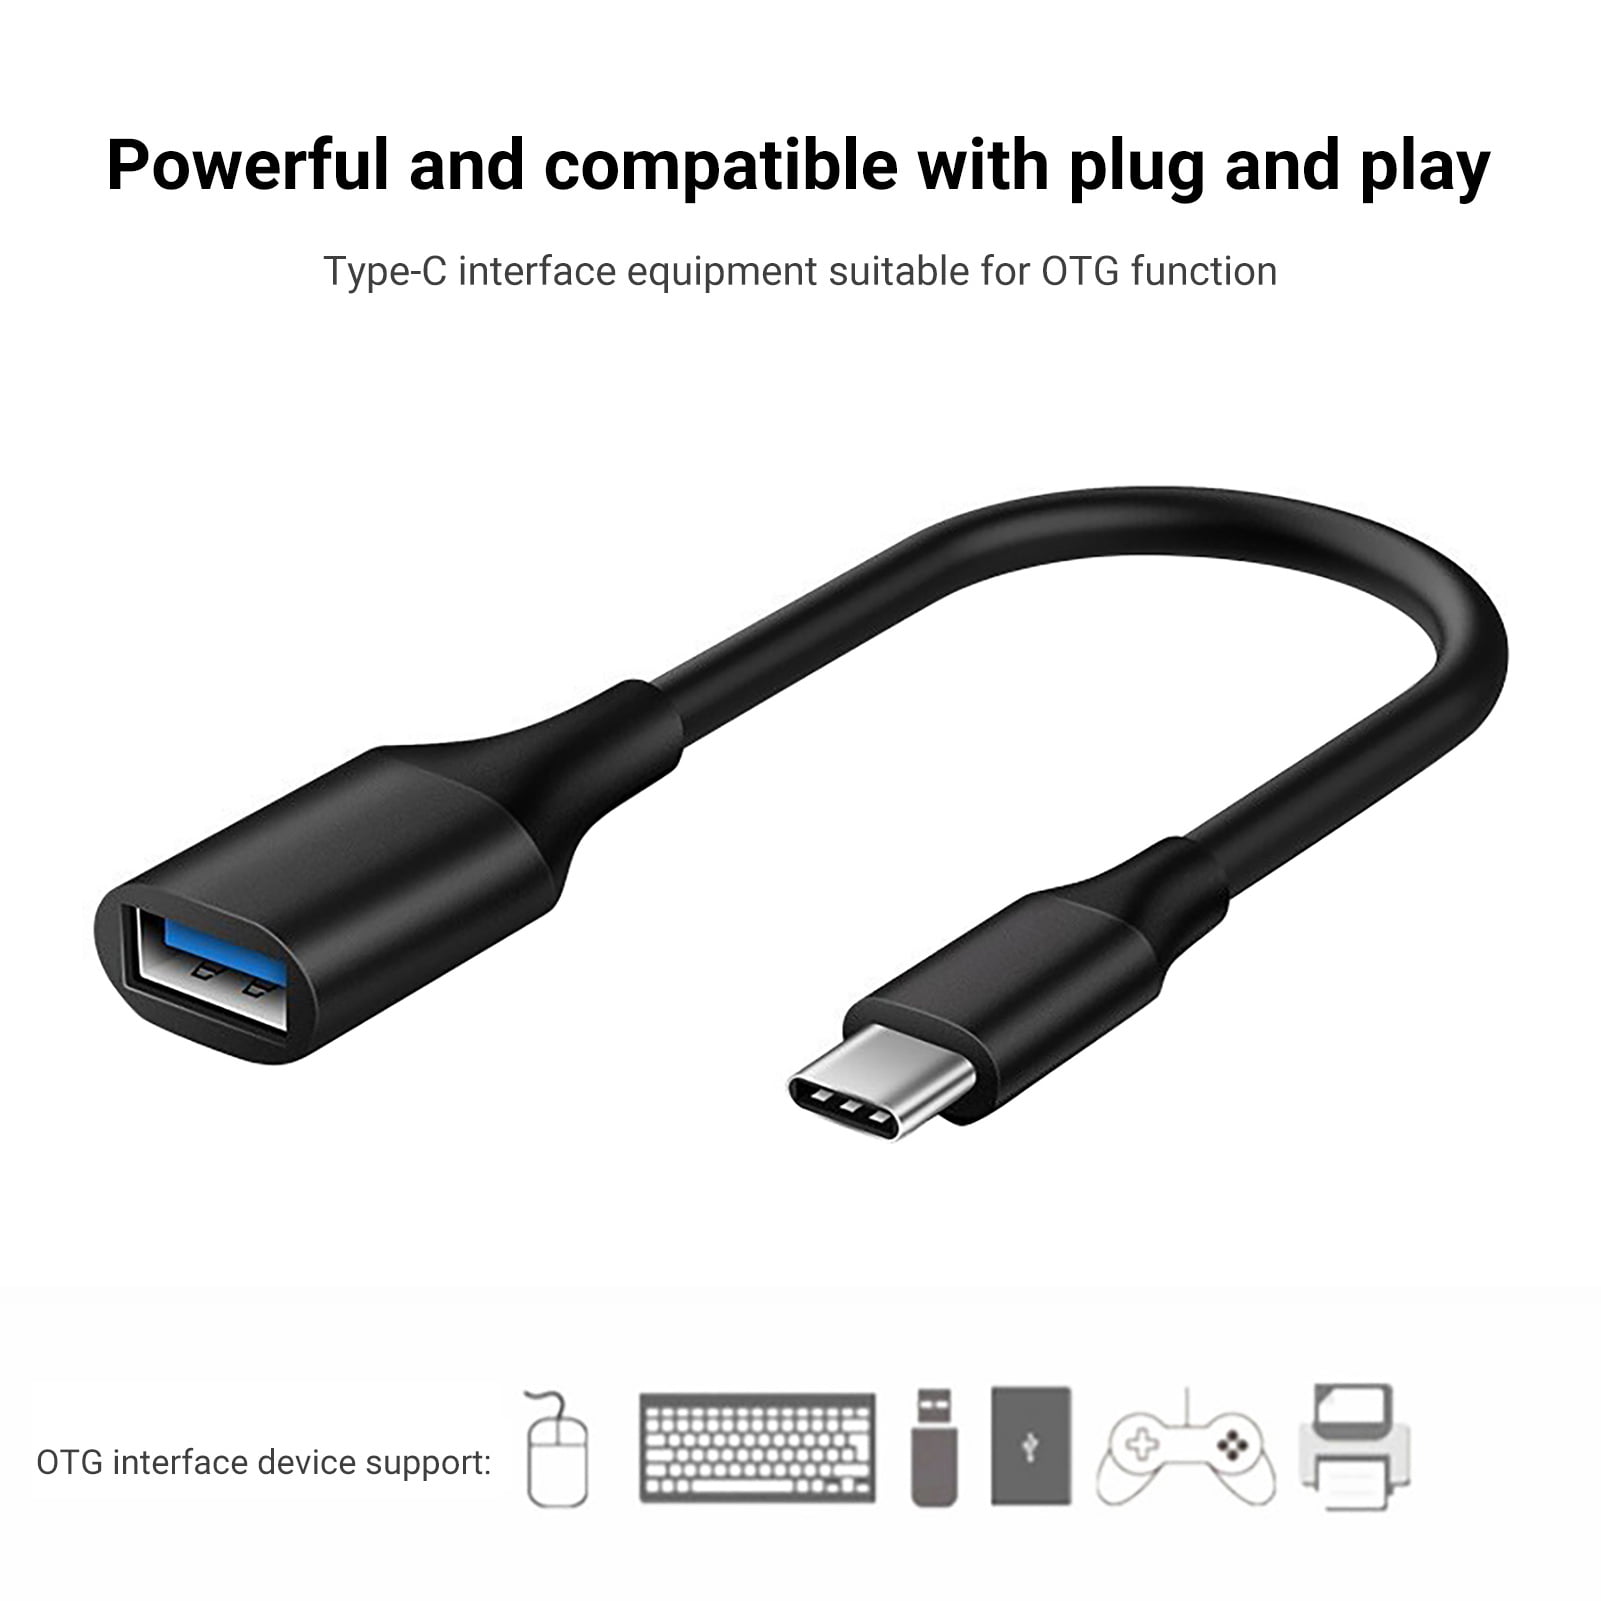 Pixel 2 XL etc,Black USB-C to USB 3.0 Adapter 3-Pack Compatible MacBook Pro GEN1 Support OTG Function CableCreation 0.5 ft USB 3.1 Type C to USB Female Adapter Cord, 